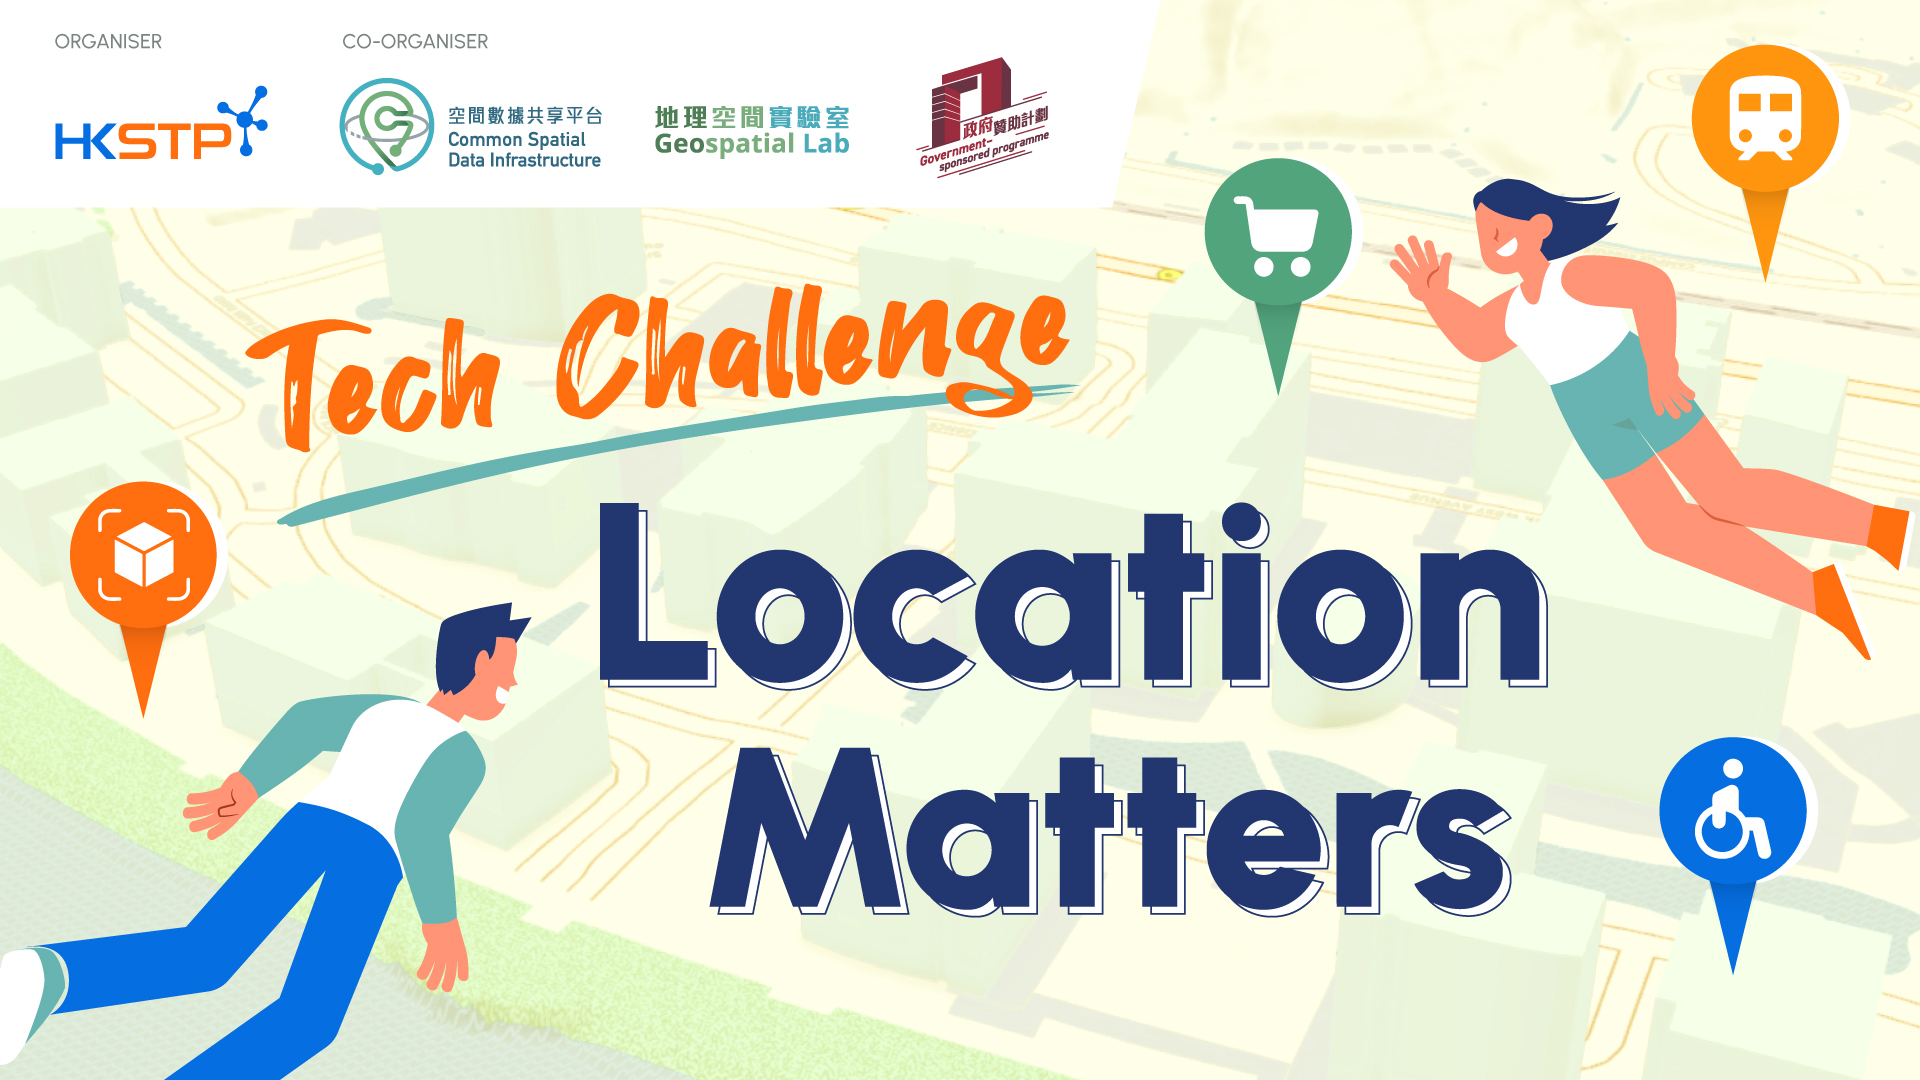 Location Matters! Tech Challenge Final Pitching & Awards Ceremony